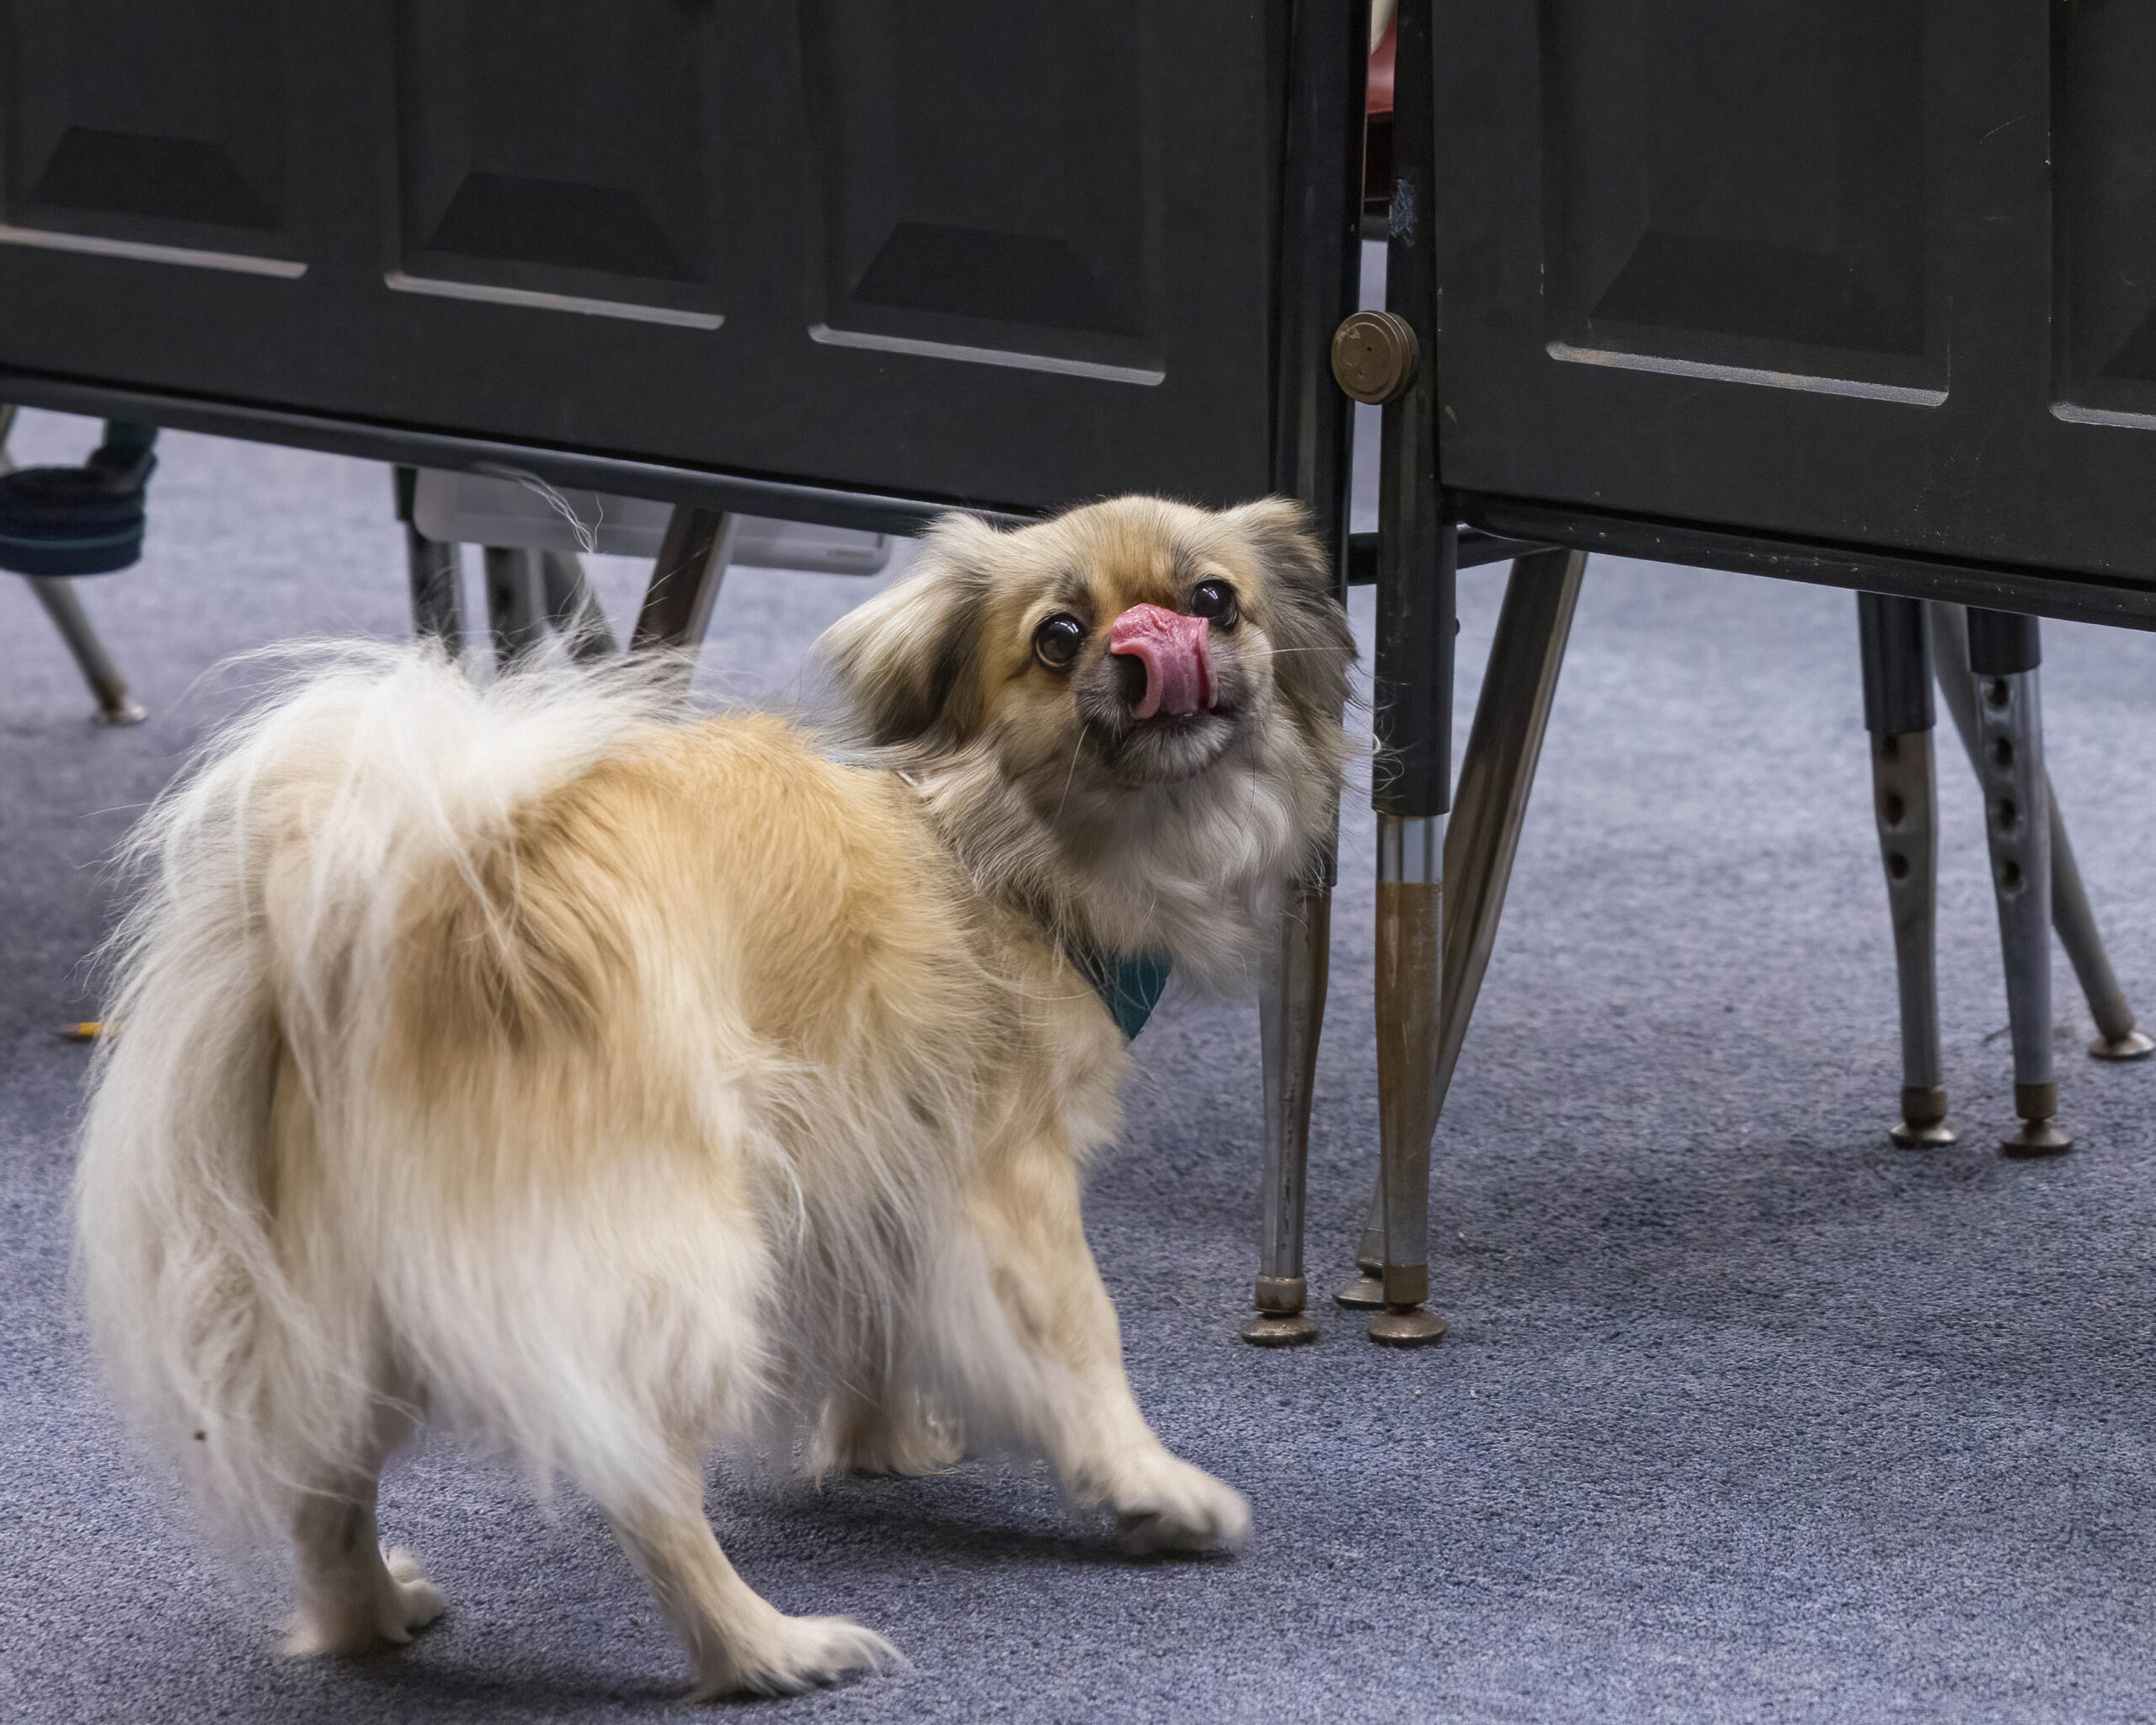 a Tibetan Spaniel, alerting to the handler the location of the hide